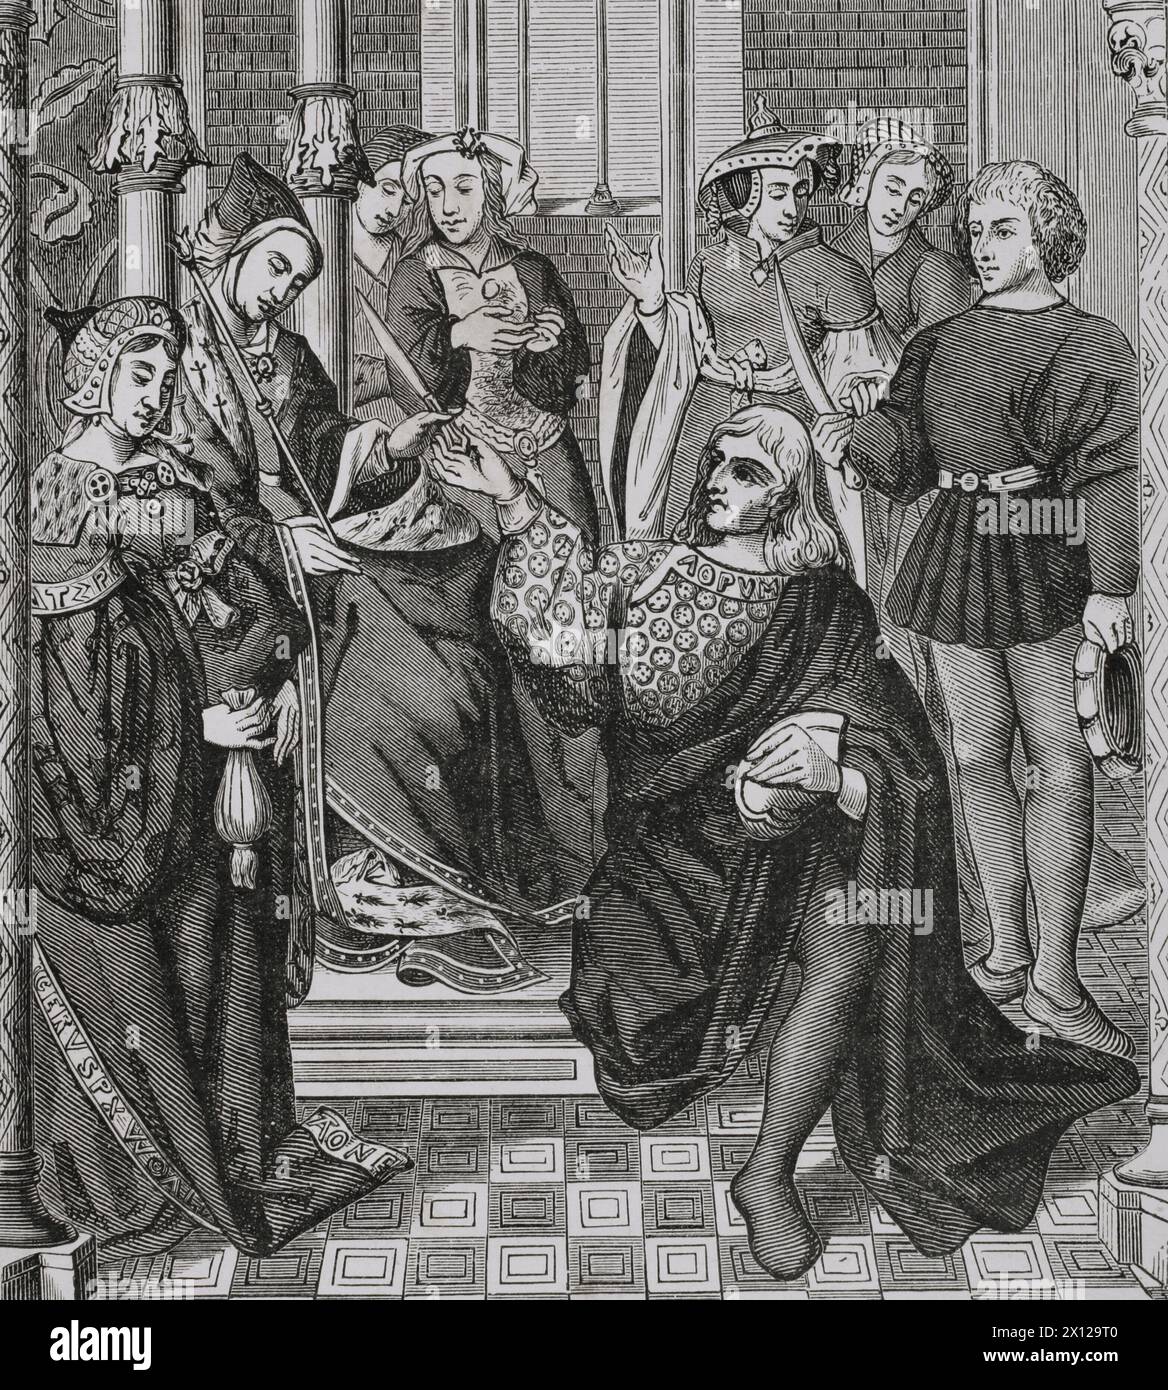 Fredegund (543-597). Queen consort of Neustria. Third wife of King Chilperic I. Queen Fredegund, seated on the throne, orders two young men from Thérouanne to assassinate Sigebert, King of Austrasia. Engraving after a stained glass of the Cathedral Notre Dame of Tournai, 15th century. 'Moeurs, usages et costumes au moyen-âge et à l'époque de la Renaissance', by Paul Lacroix. Paris, 1878. Stock Photo